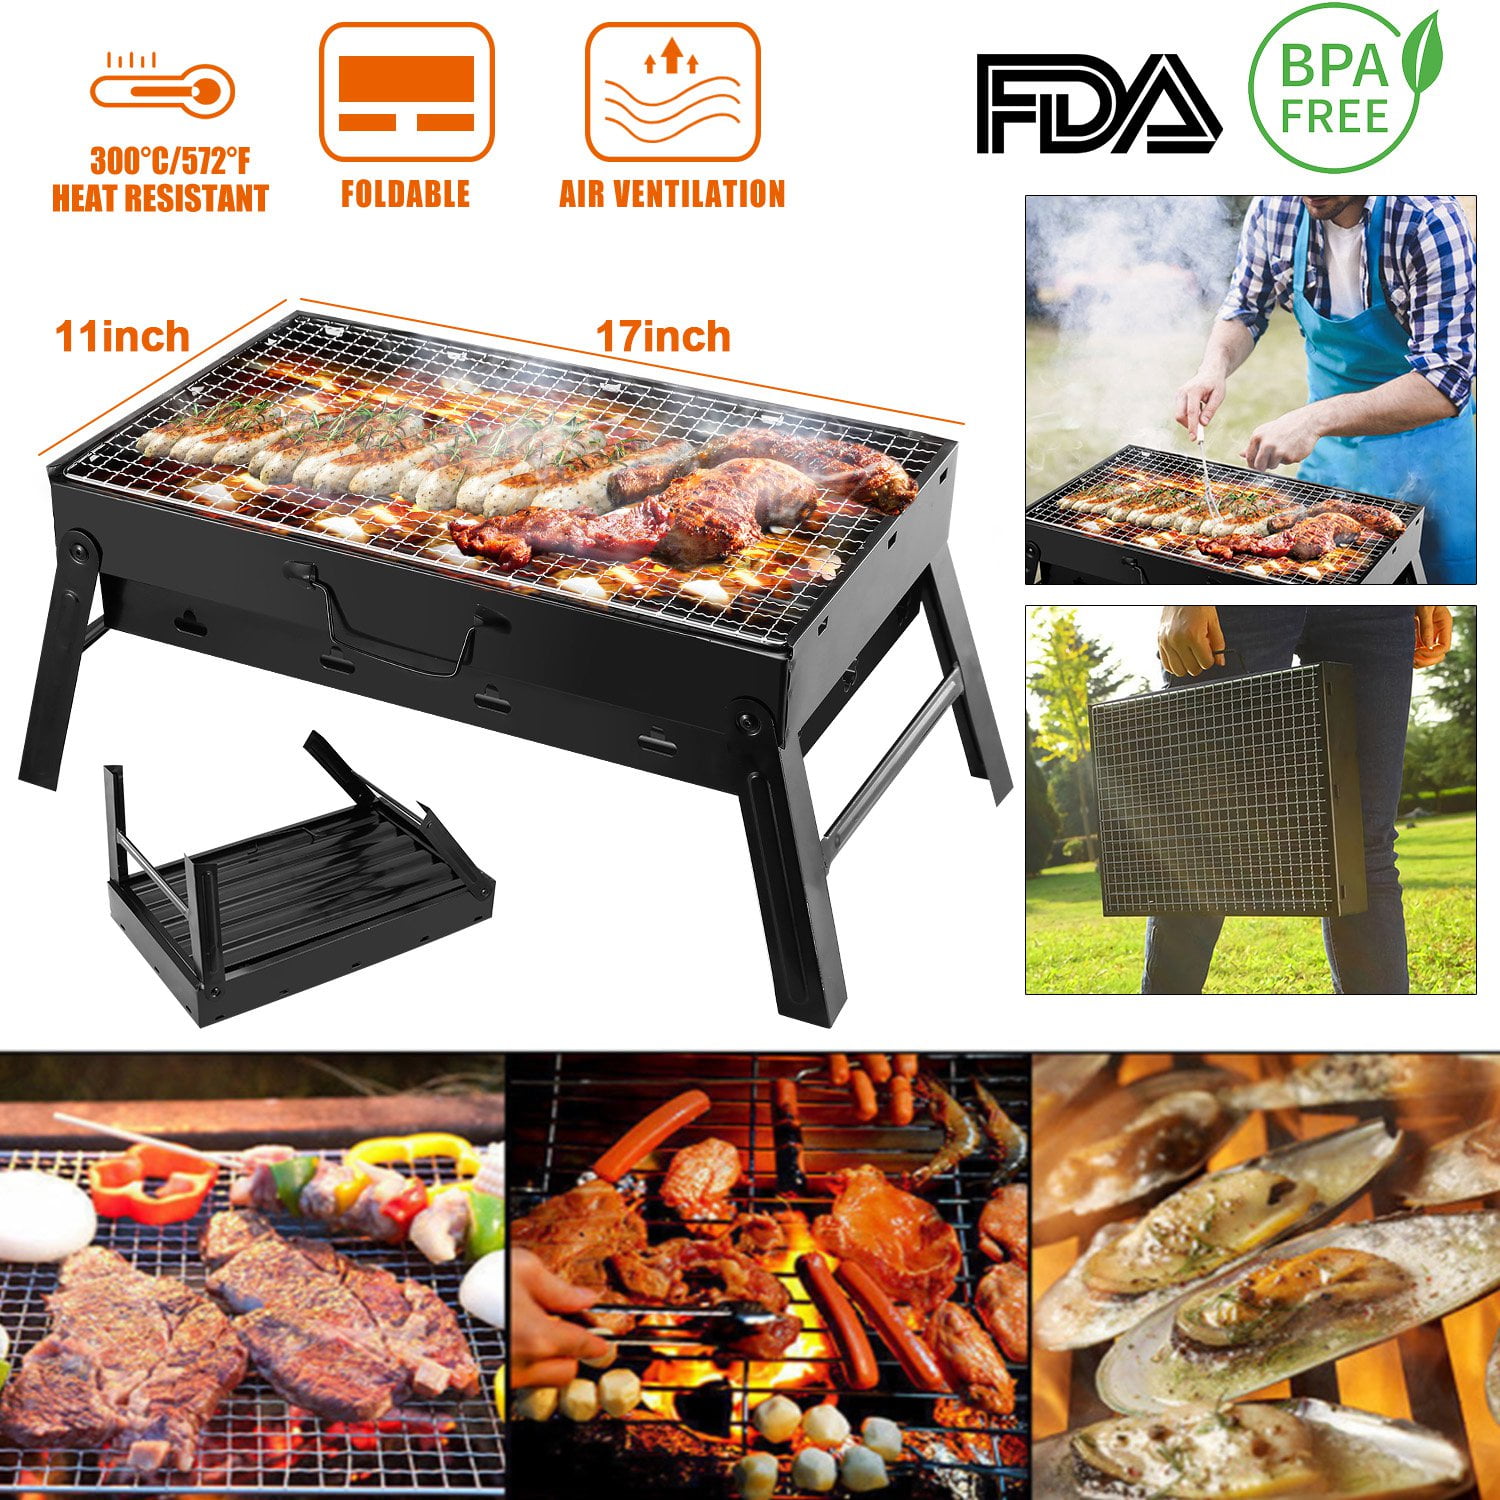 iMounTEK Foldable BBQ Grill, Portable 1472 F Stainless Steel Charcoal Barbeque Grill Set for Camping Picnic Backyard Cooking Party